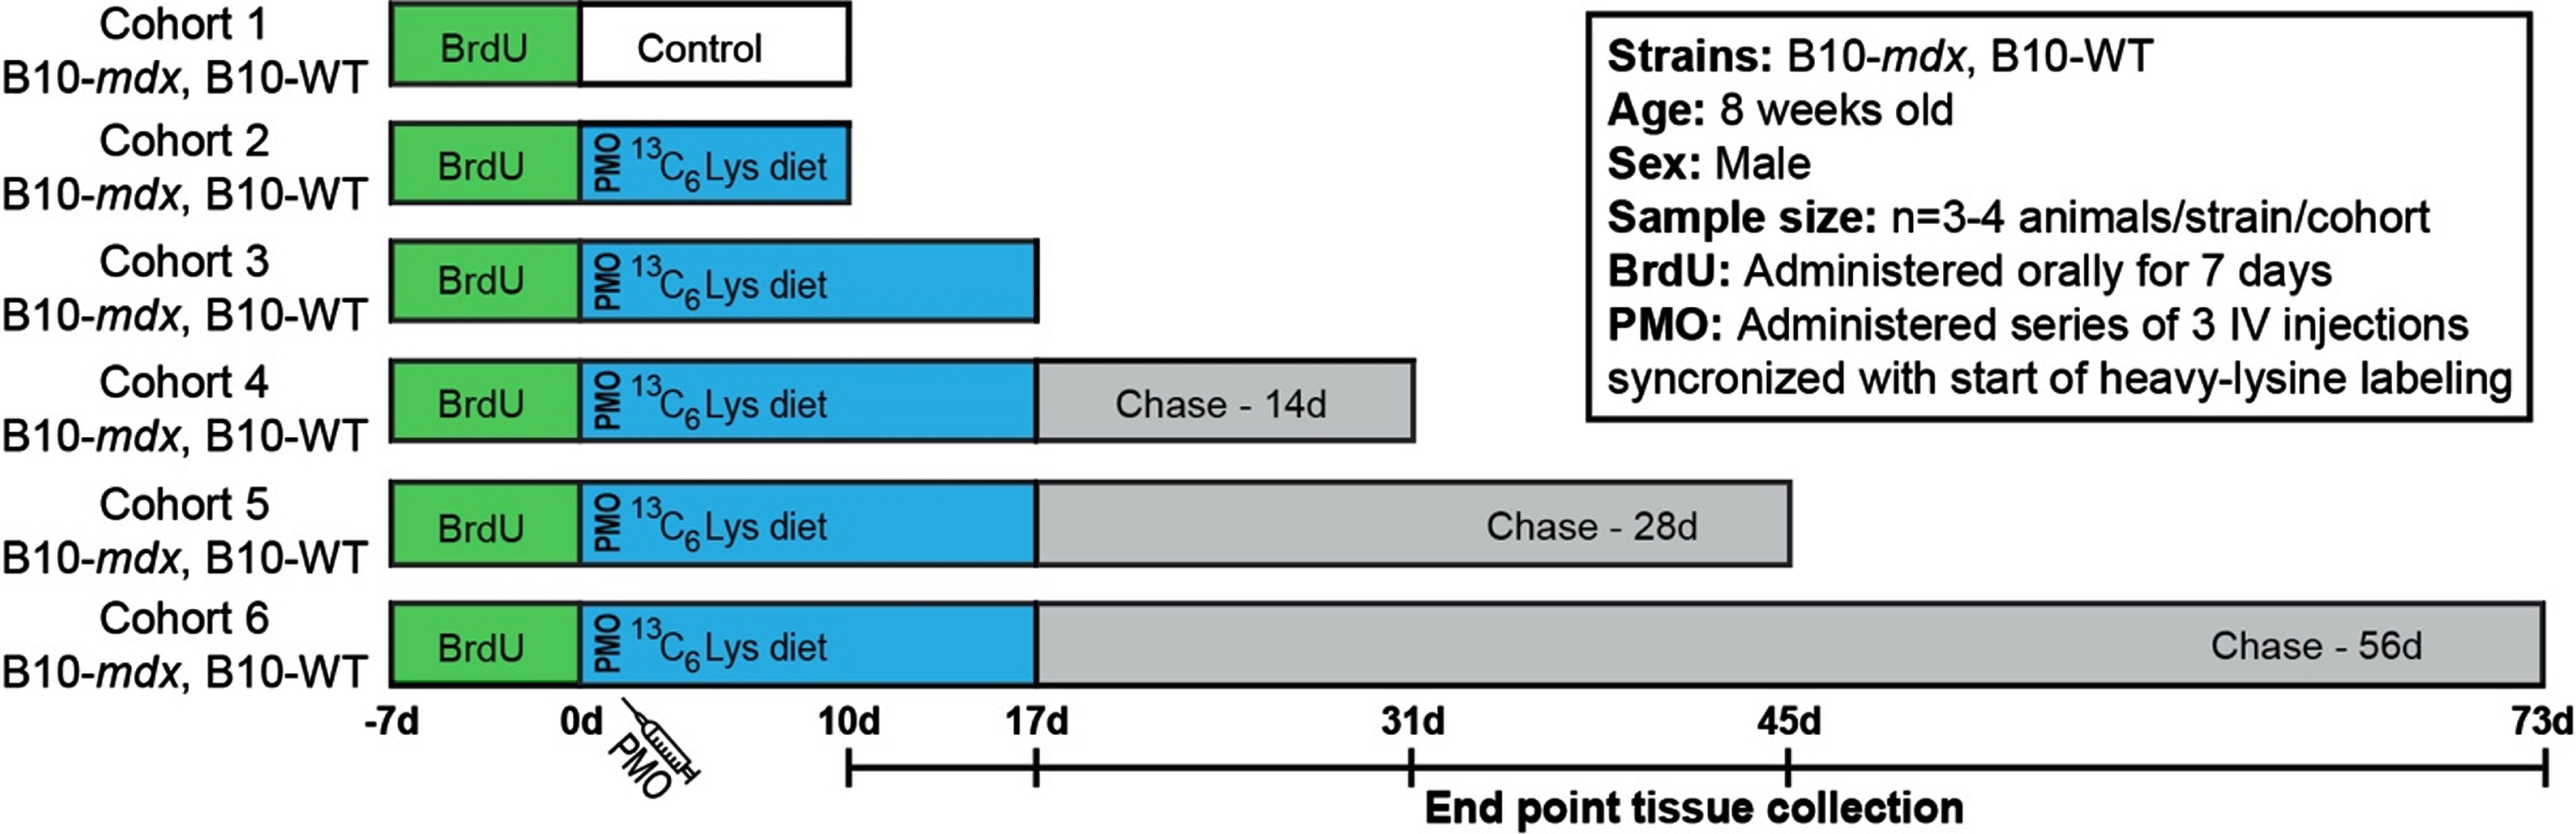 Workflow to examine the turnover of dystrophin and DGC proteins after exon skipping therapy. Schematic representation of SILAM-based MS approach to evaluate dystrophin expression and turnover in response to exon skipping therapy in mdx, compared to the normal dynamics in WT. BrdU was administered for 7 d prior to administration of vivo-PMO and the 3C6-Lys (heavy-Lys) ‘pulse’ phase. Cohorts were then provided a ‘chase’ phase to evaluate the dynamics of dystrophin turnover over time (10 d –73 d). End point tissue collection dates are shown in the timeline.